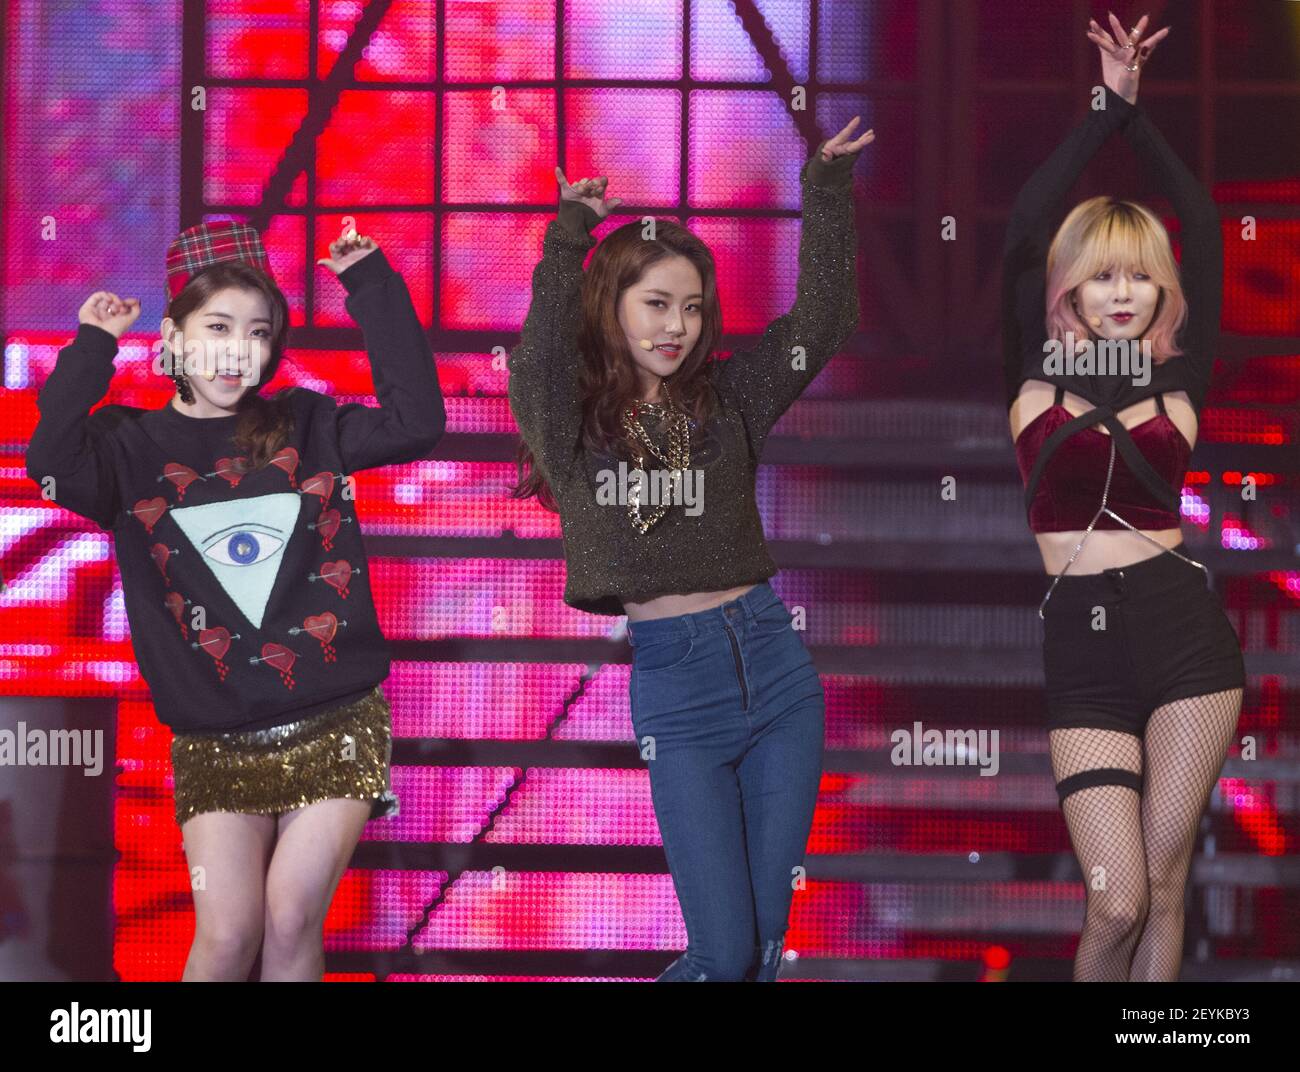 3 November 2013 - Goyang, South Korea : South Korean K-Pop girl group 4Minute, performs onstage during the "You Tube Music Awards" at Kintex Exhibition hall in Goyang, South Korea on November 3, 2013. Photo Credit: Lee Young-ho/Sipa USA ***Editorial Use Only*** Stock Photo